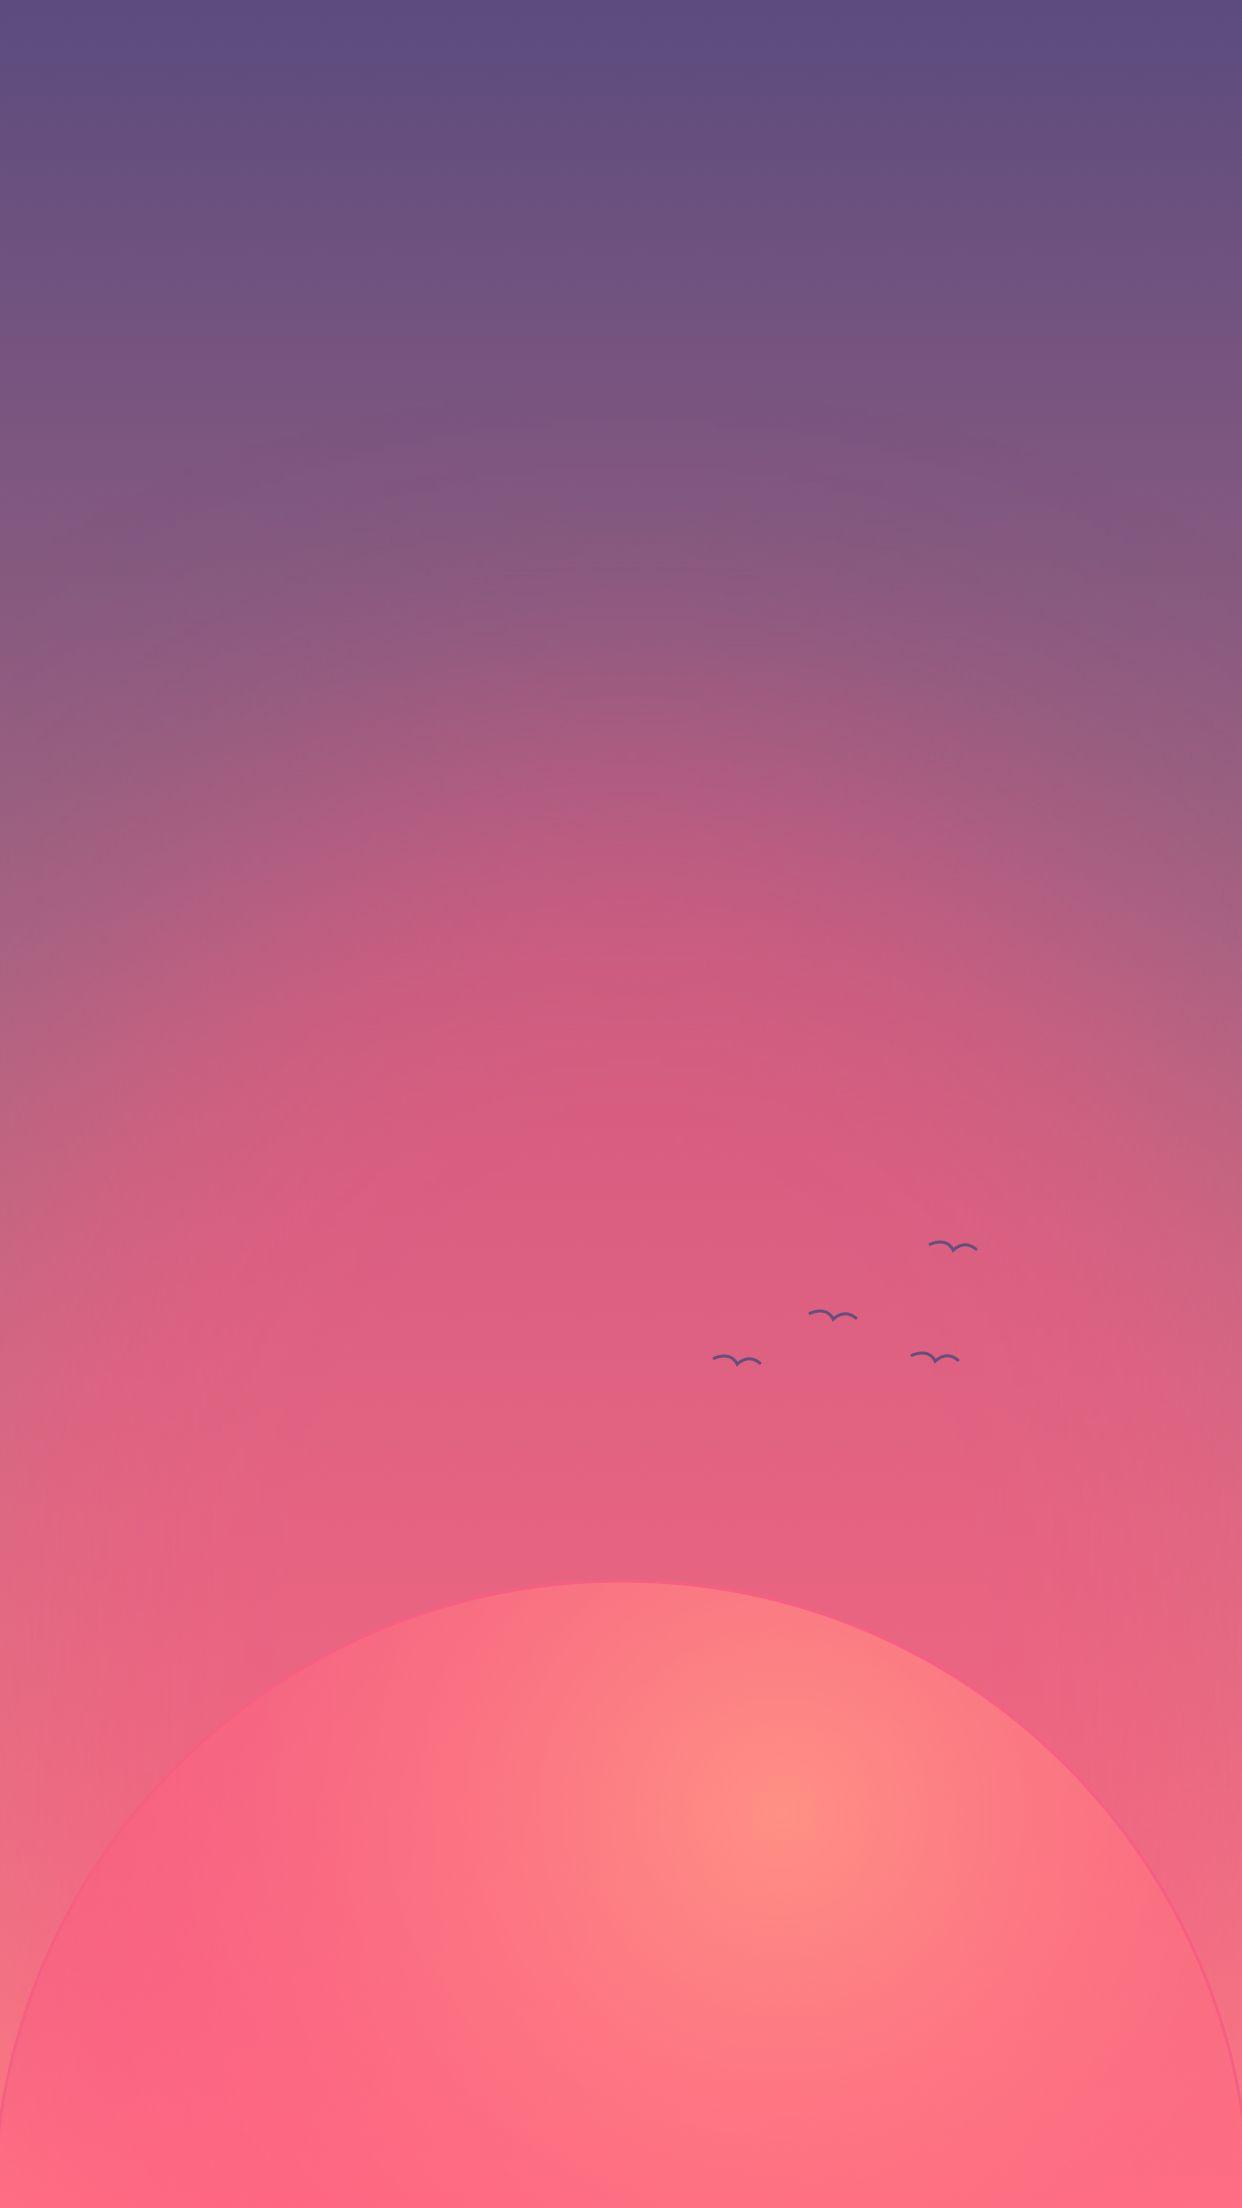 Minimalist Pink Wallpapers - Top Free Minimalist Pink Backgrounds